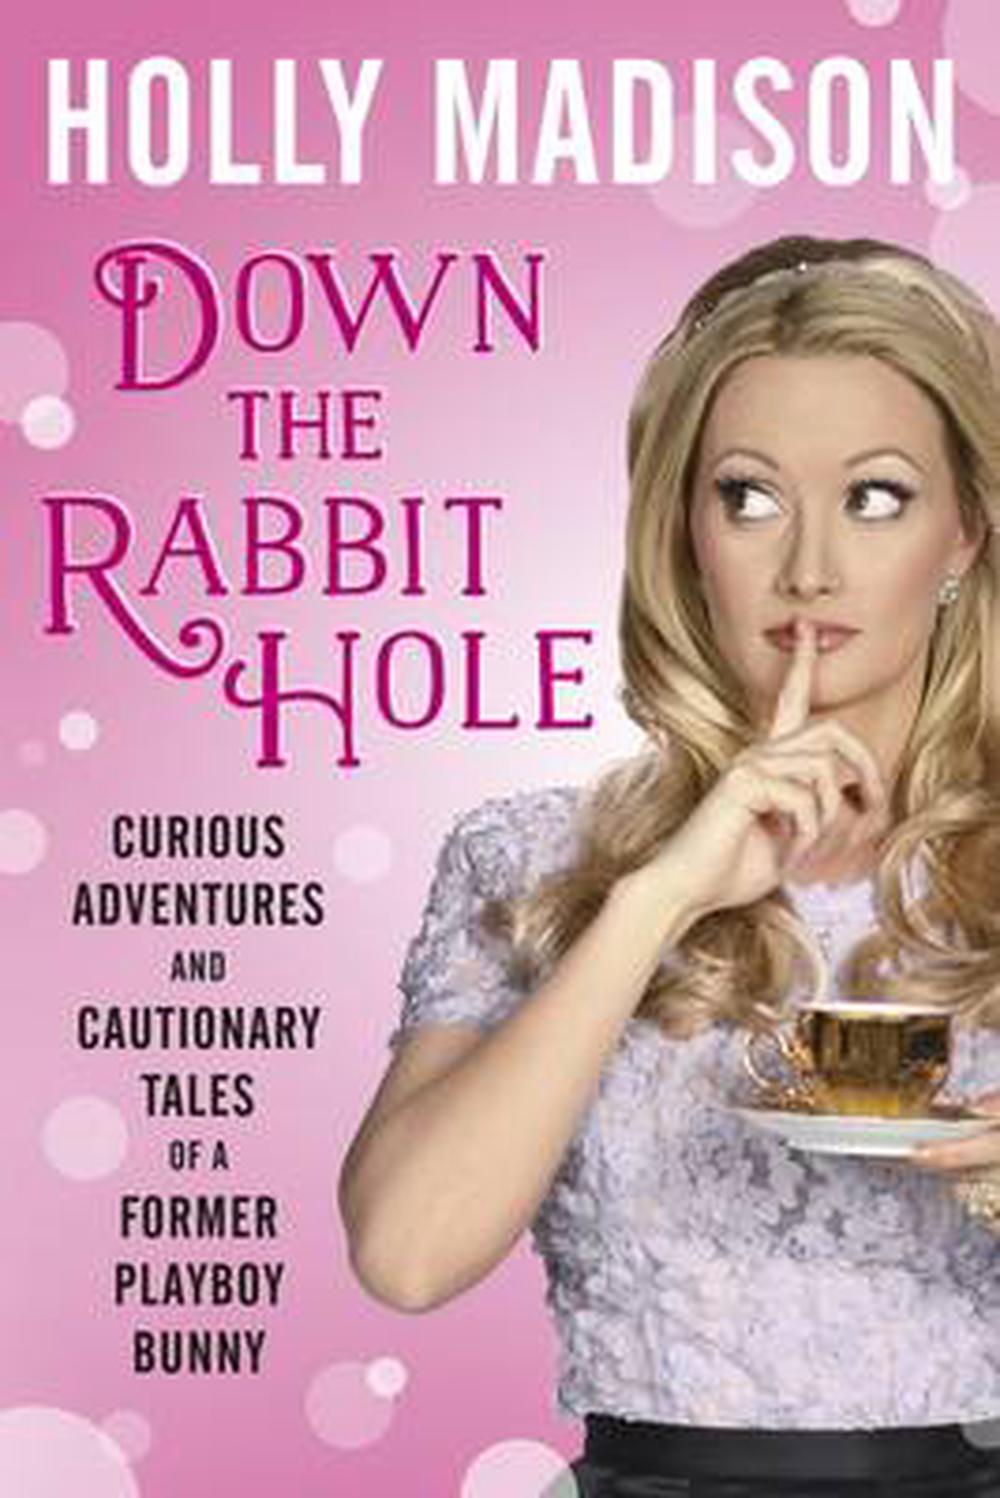 down the rabbit hole book peter abrahams